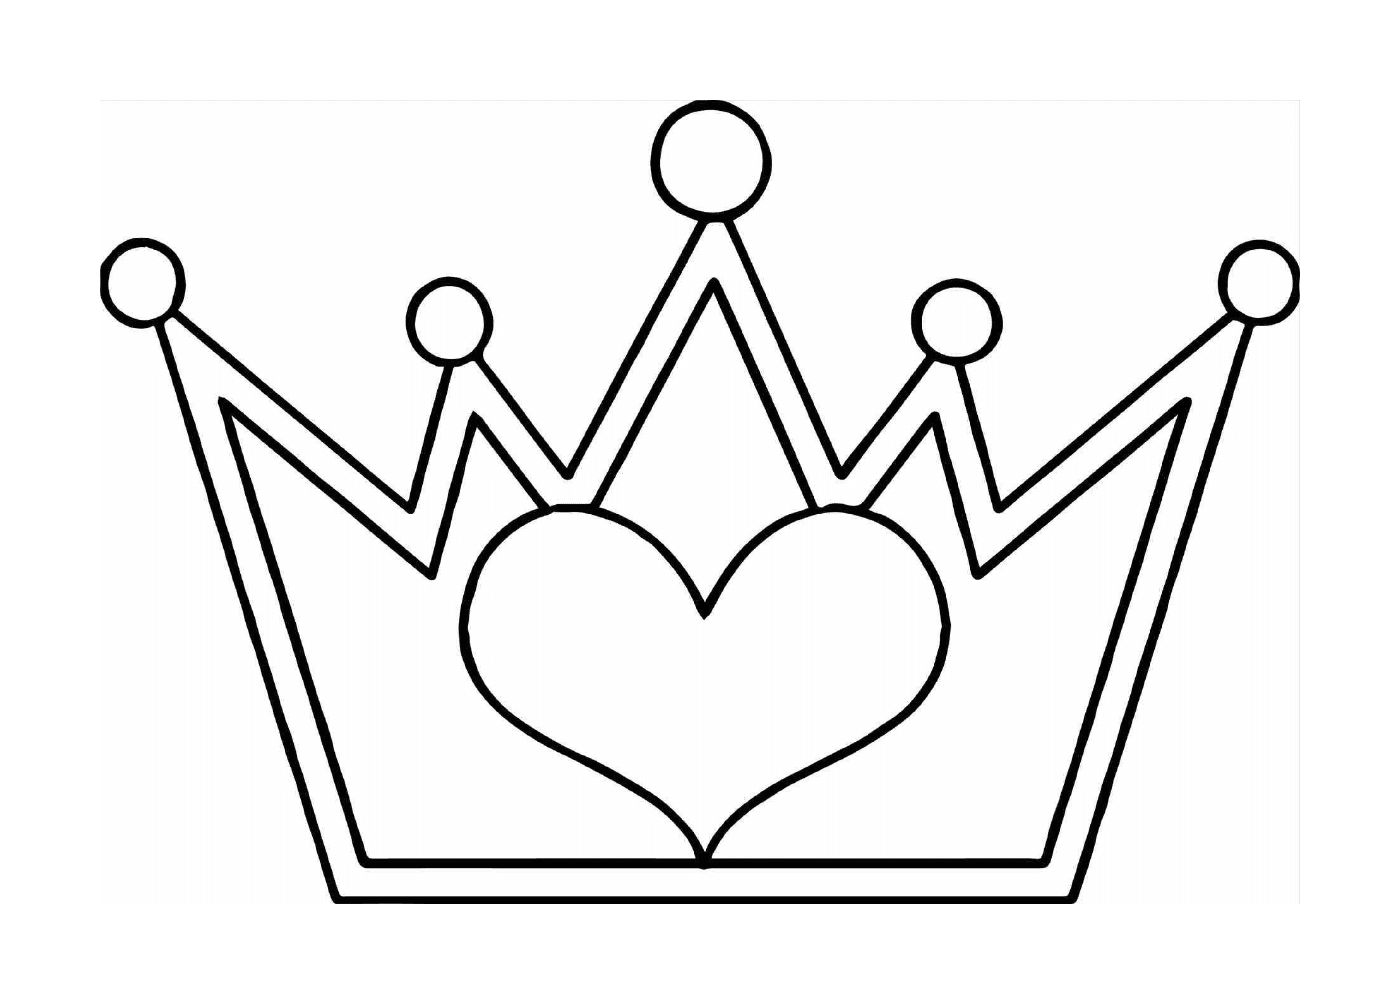  A crown with a heart 